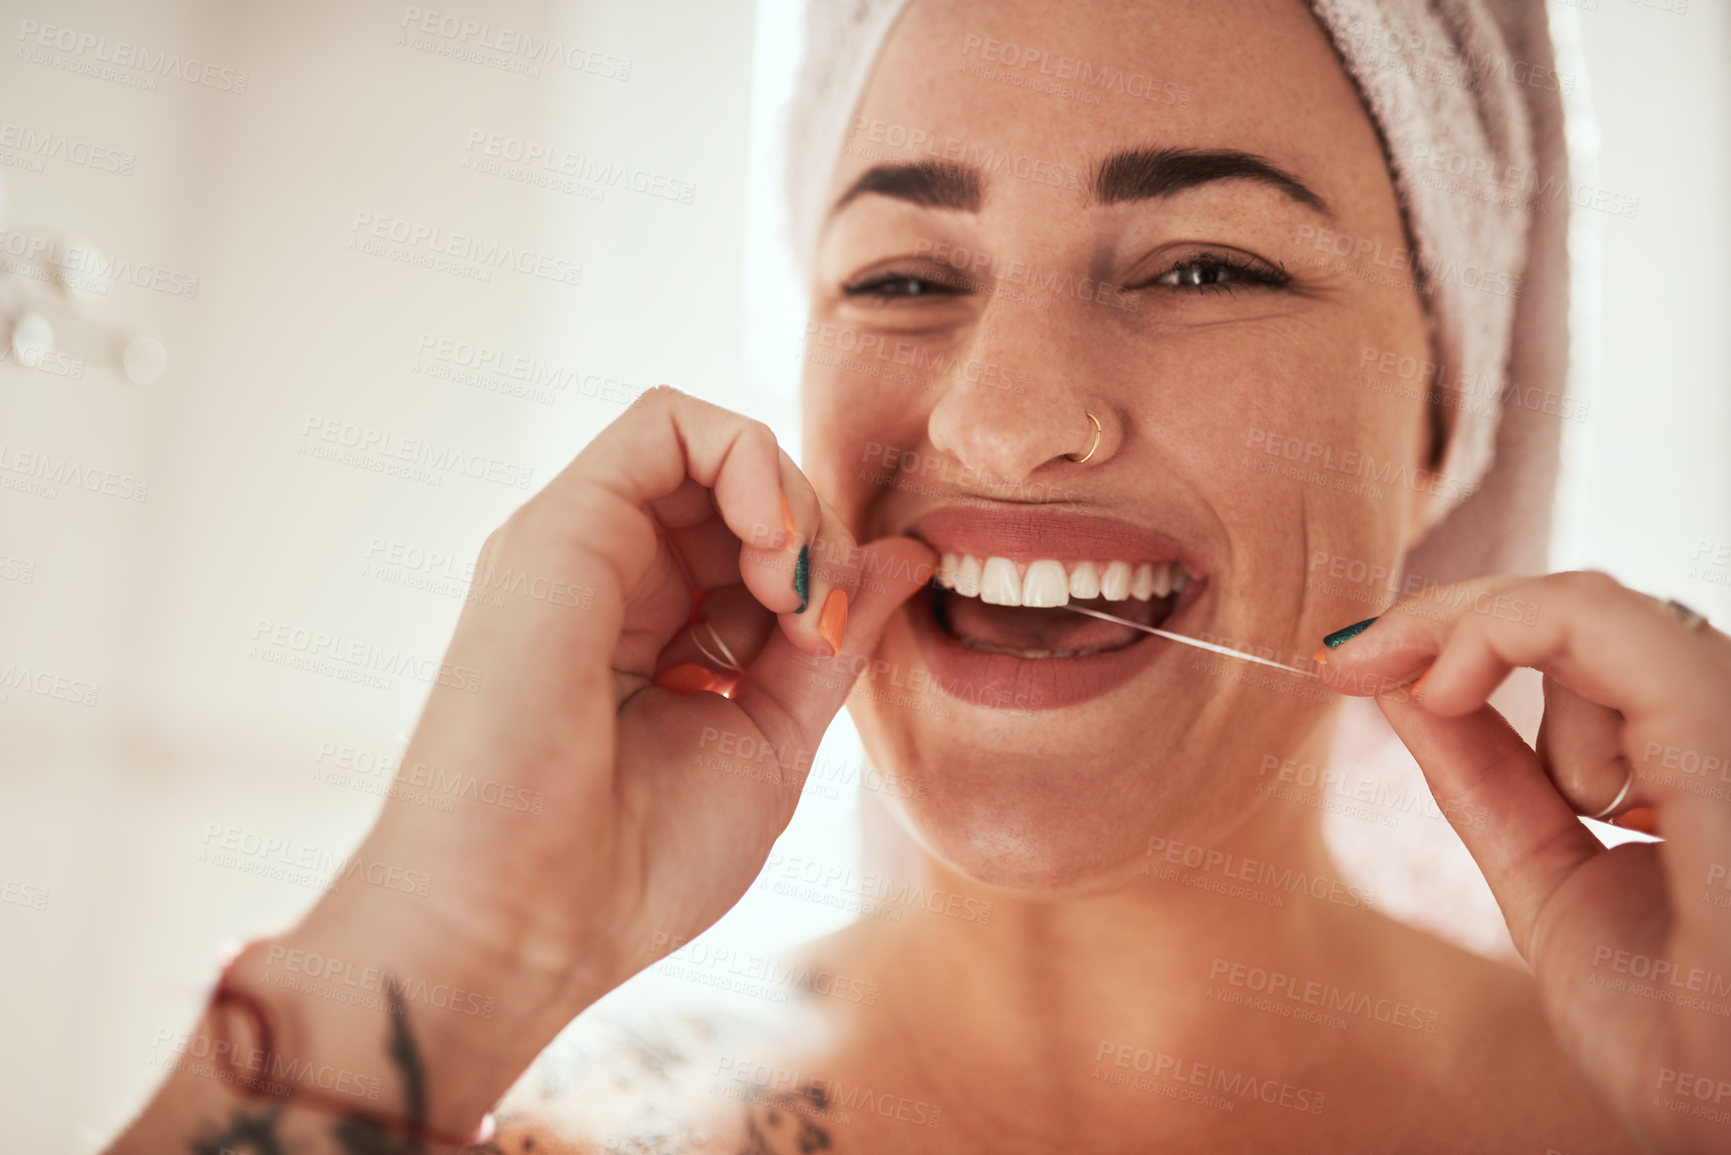 Buy stock photo Shot of an attractive young woman flossing her teeth in the bathroom at home